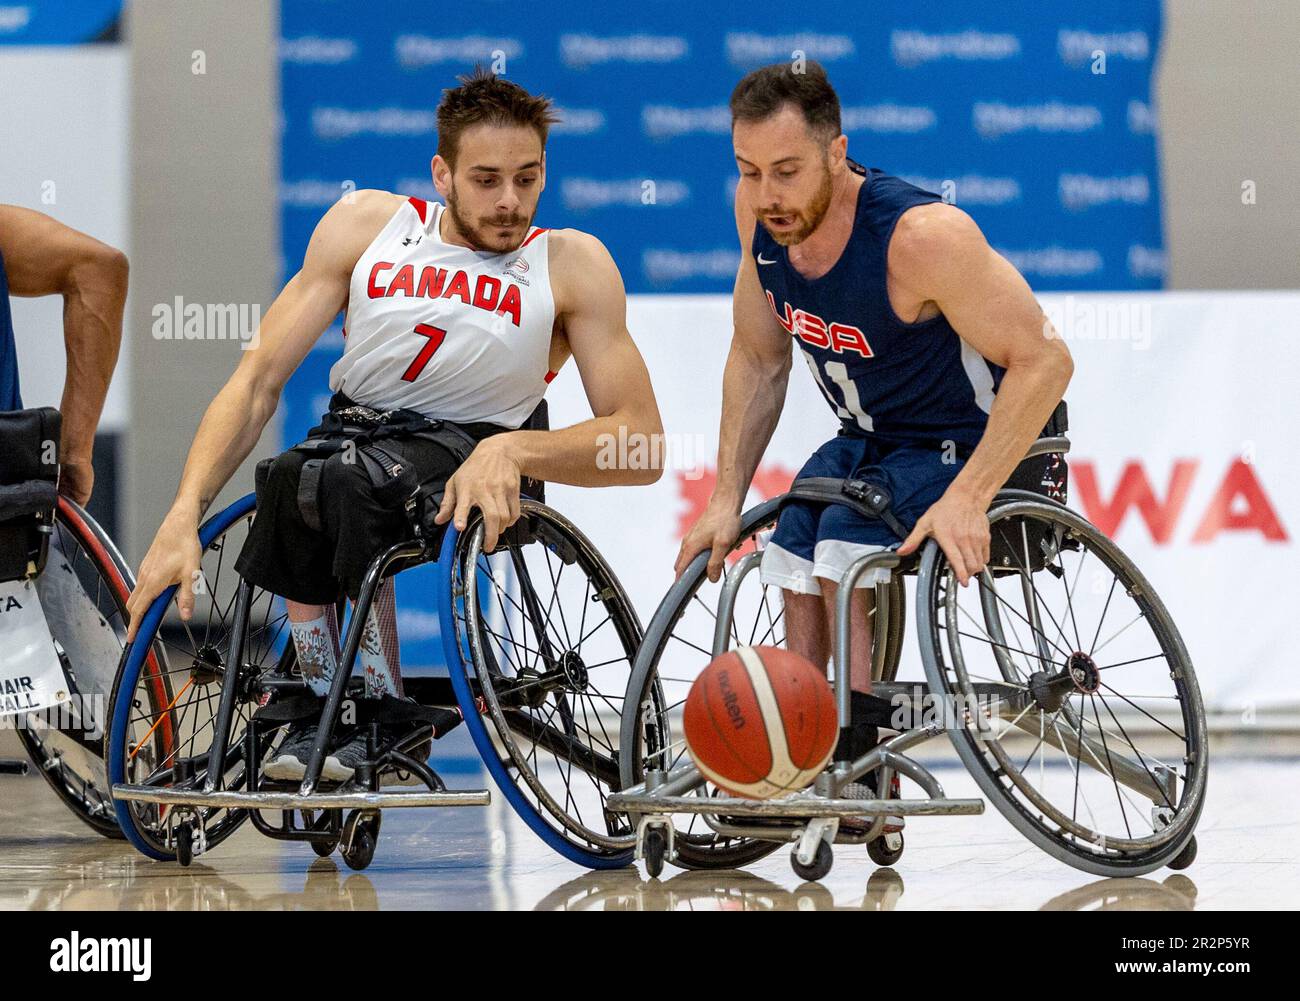 Ottawa, Canada. 20 May 2023. Vincent Dallaire (7) of Team Canada and Steve Serio (11) of Team USA in a Canada v USA international Wheelchair Basketball Game at the 2023 Ottawa Invitational, held at Carleton University. Copyright 2023 Sean Burges / Mundo Sport Images Credit: Sean Burges/Alamy Live News Stock Photo